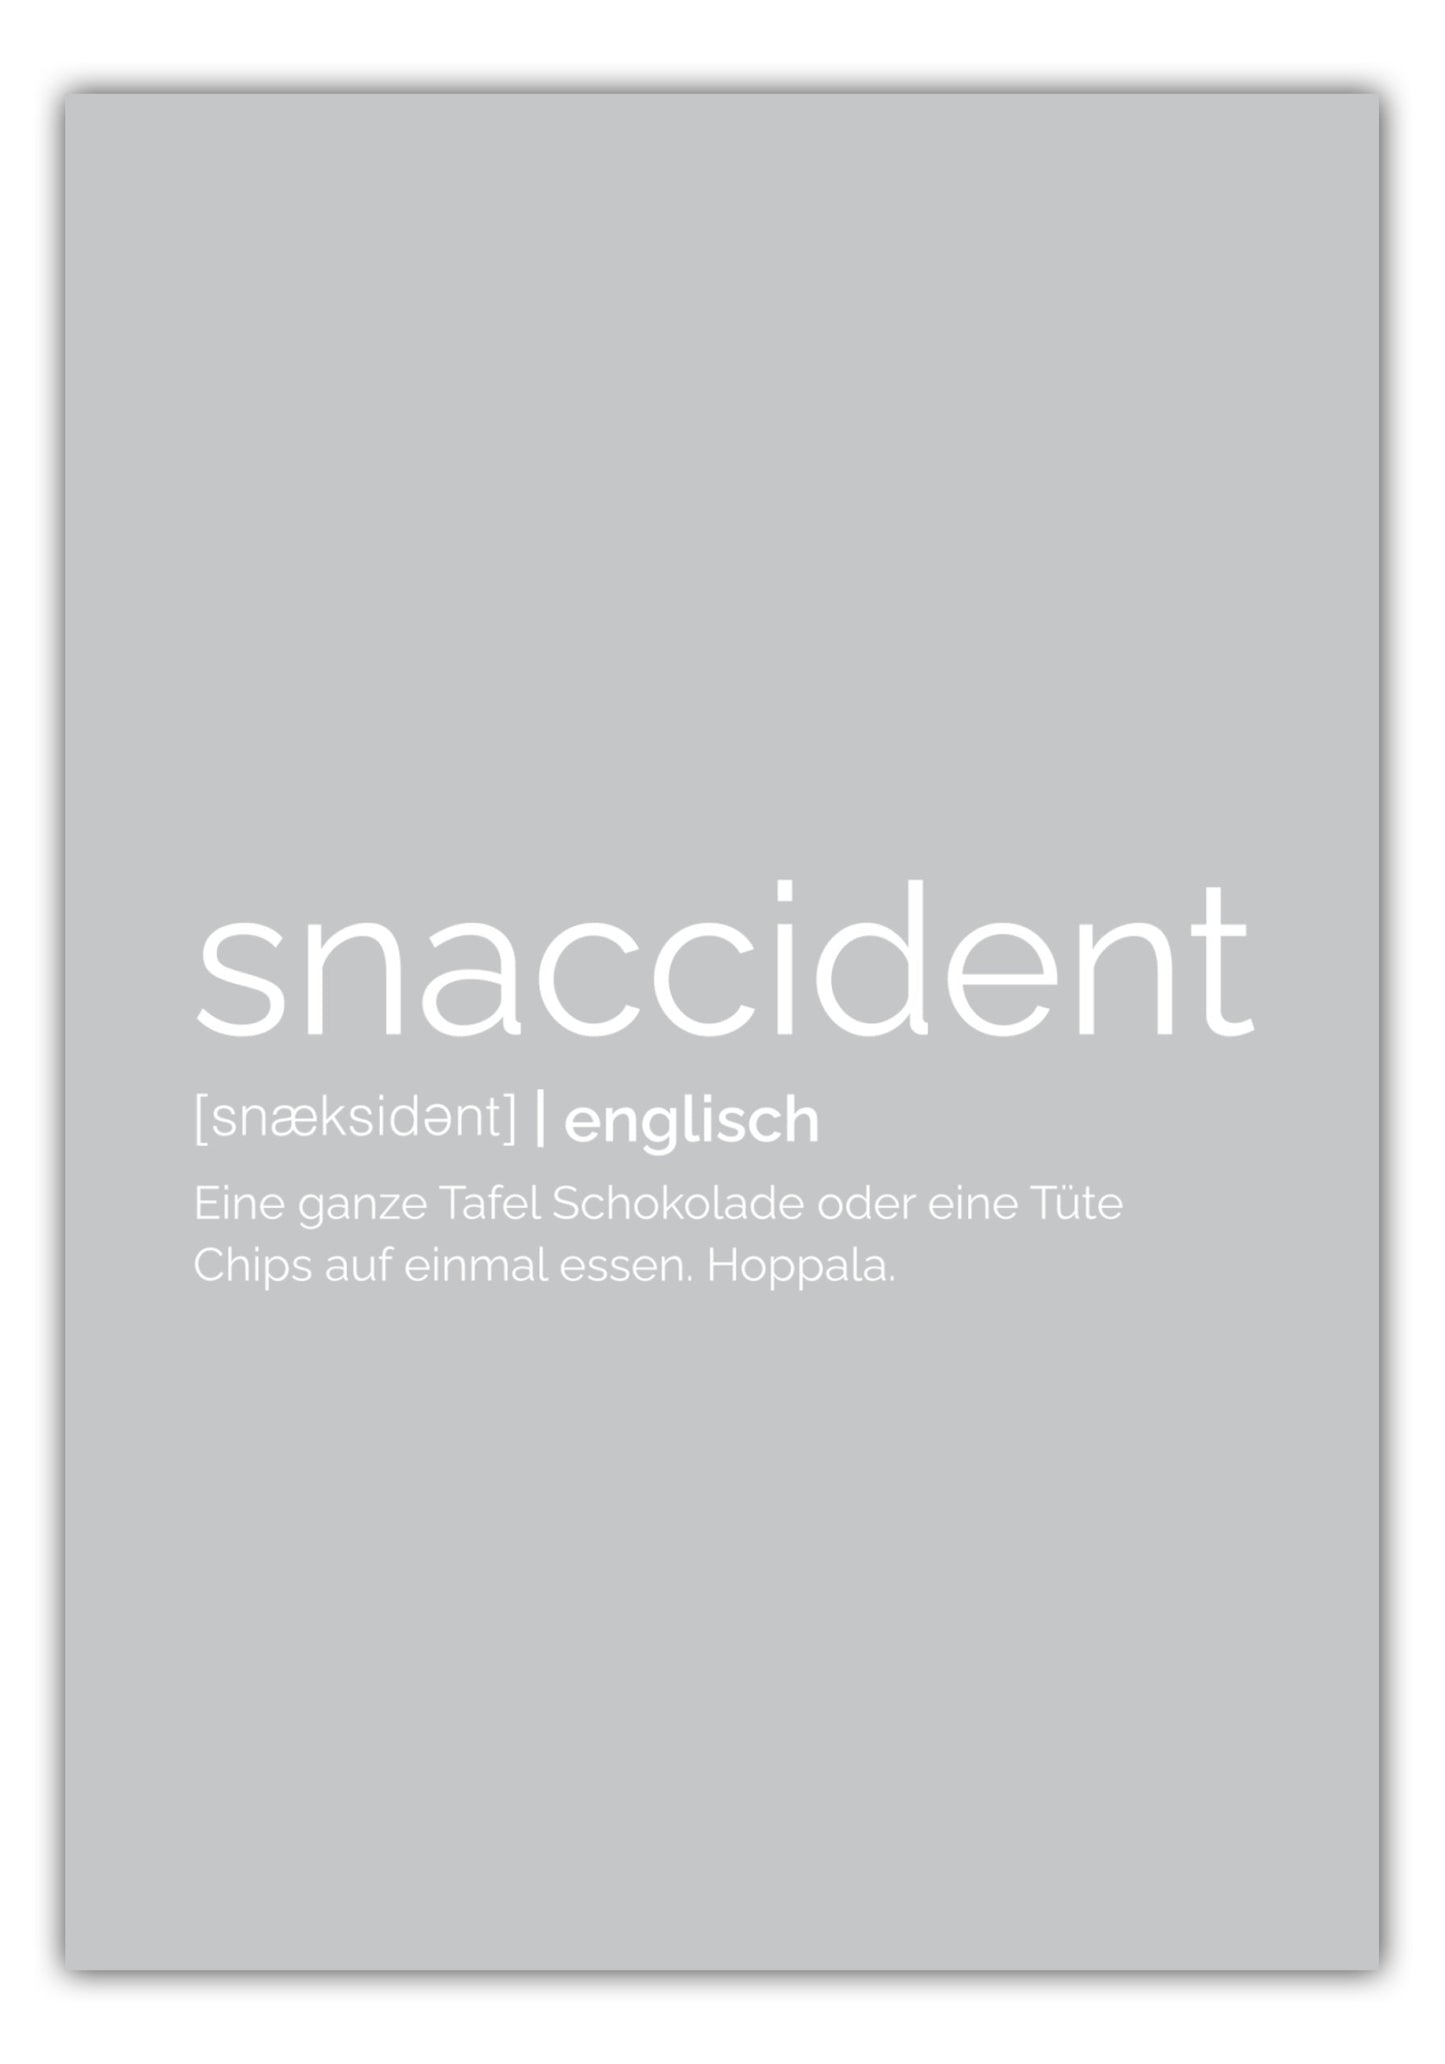 Poster Snaccident